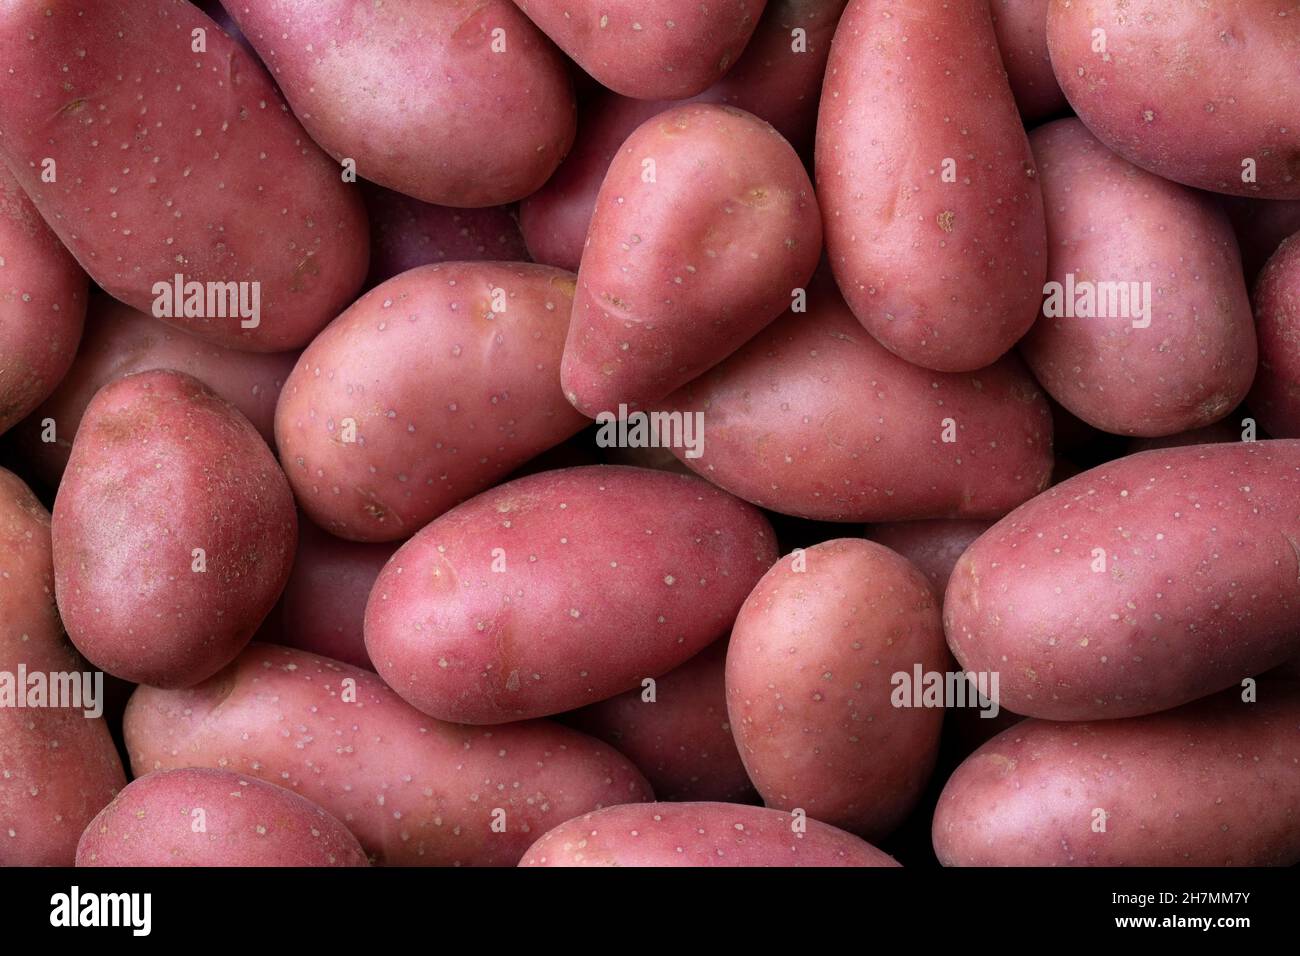 Whole Roseval potatoes stock photo. Image of uncooked - 15735456